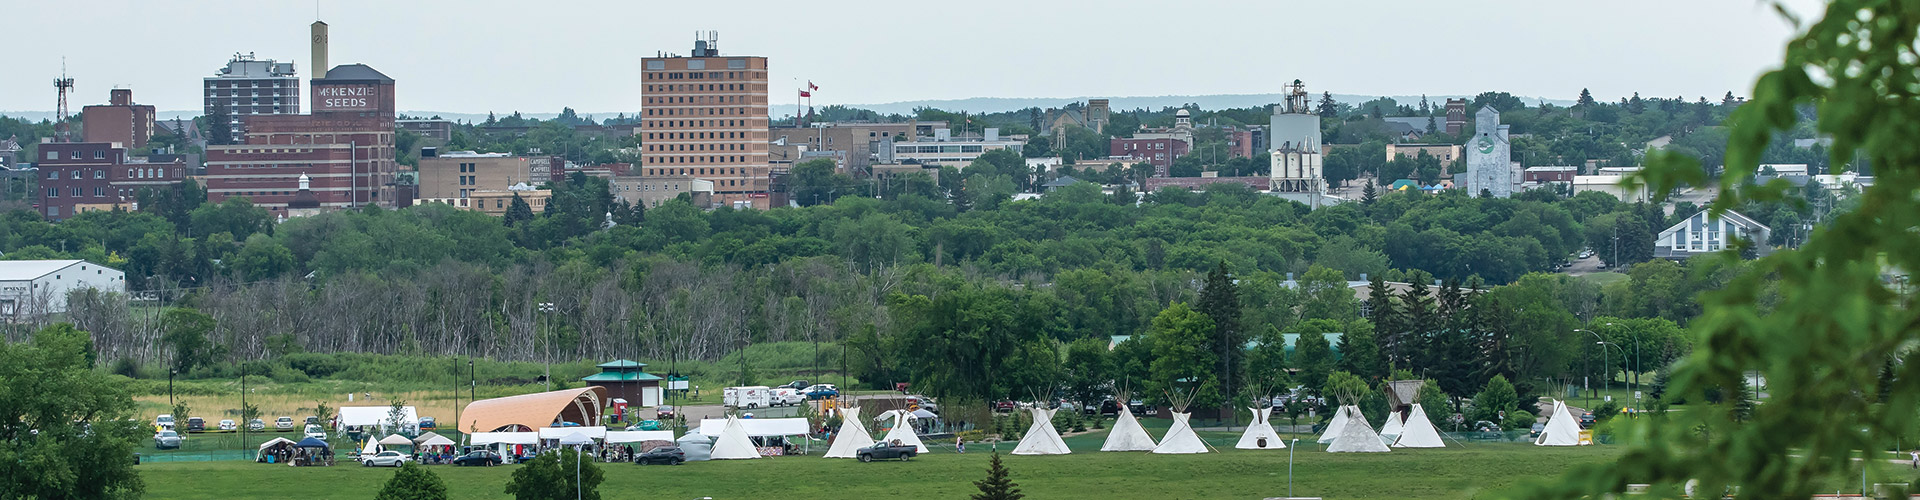 Tipis set up for National Indigenous Peoples Day at the Brandon Riverbank.